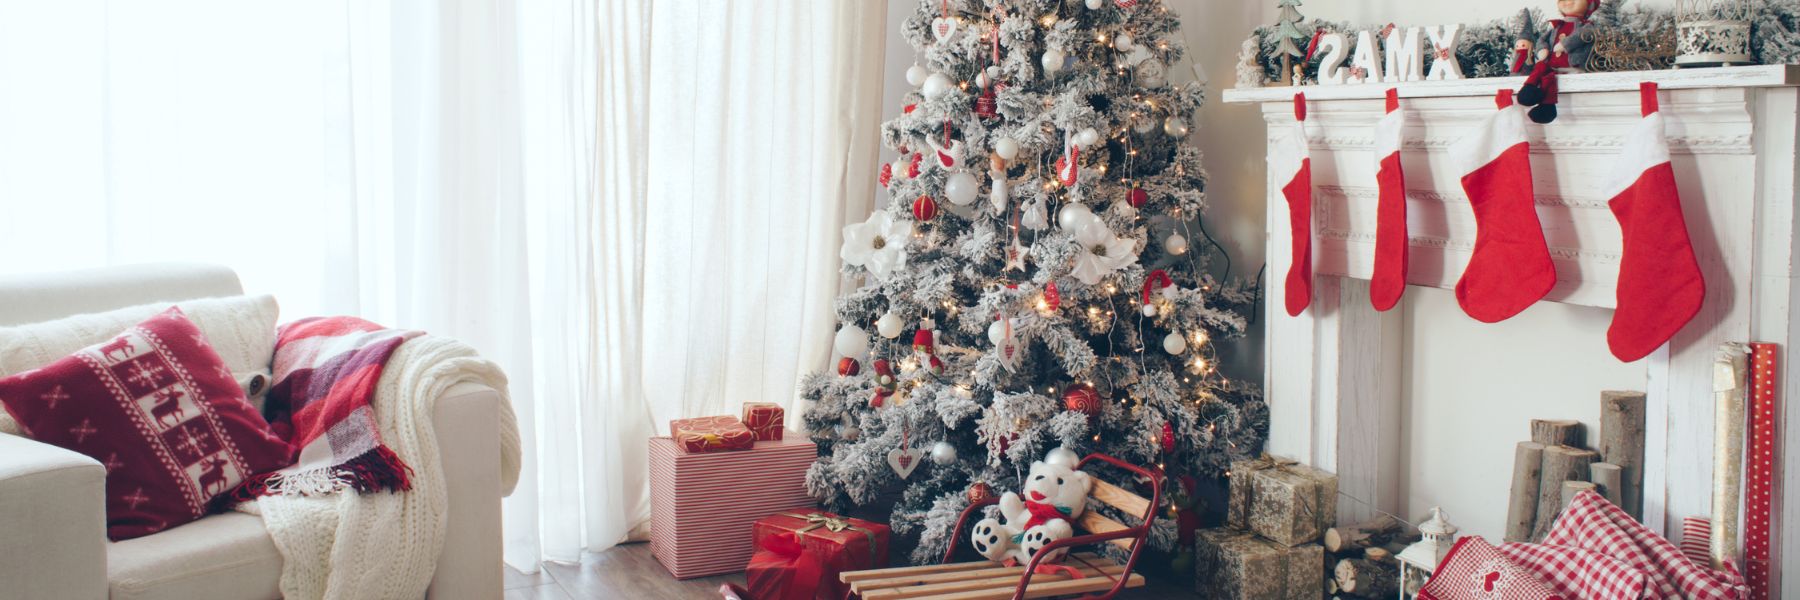 Homes Decorated for Christmas: Guide to Festive Luxury